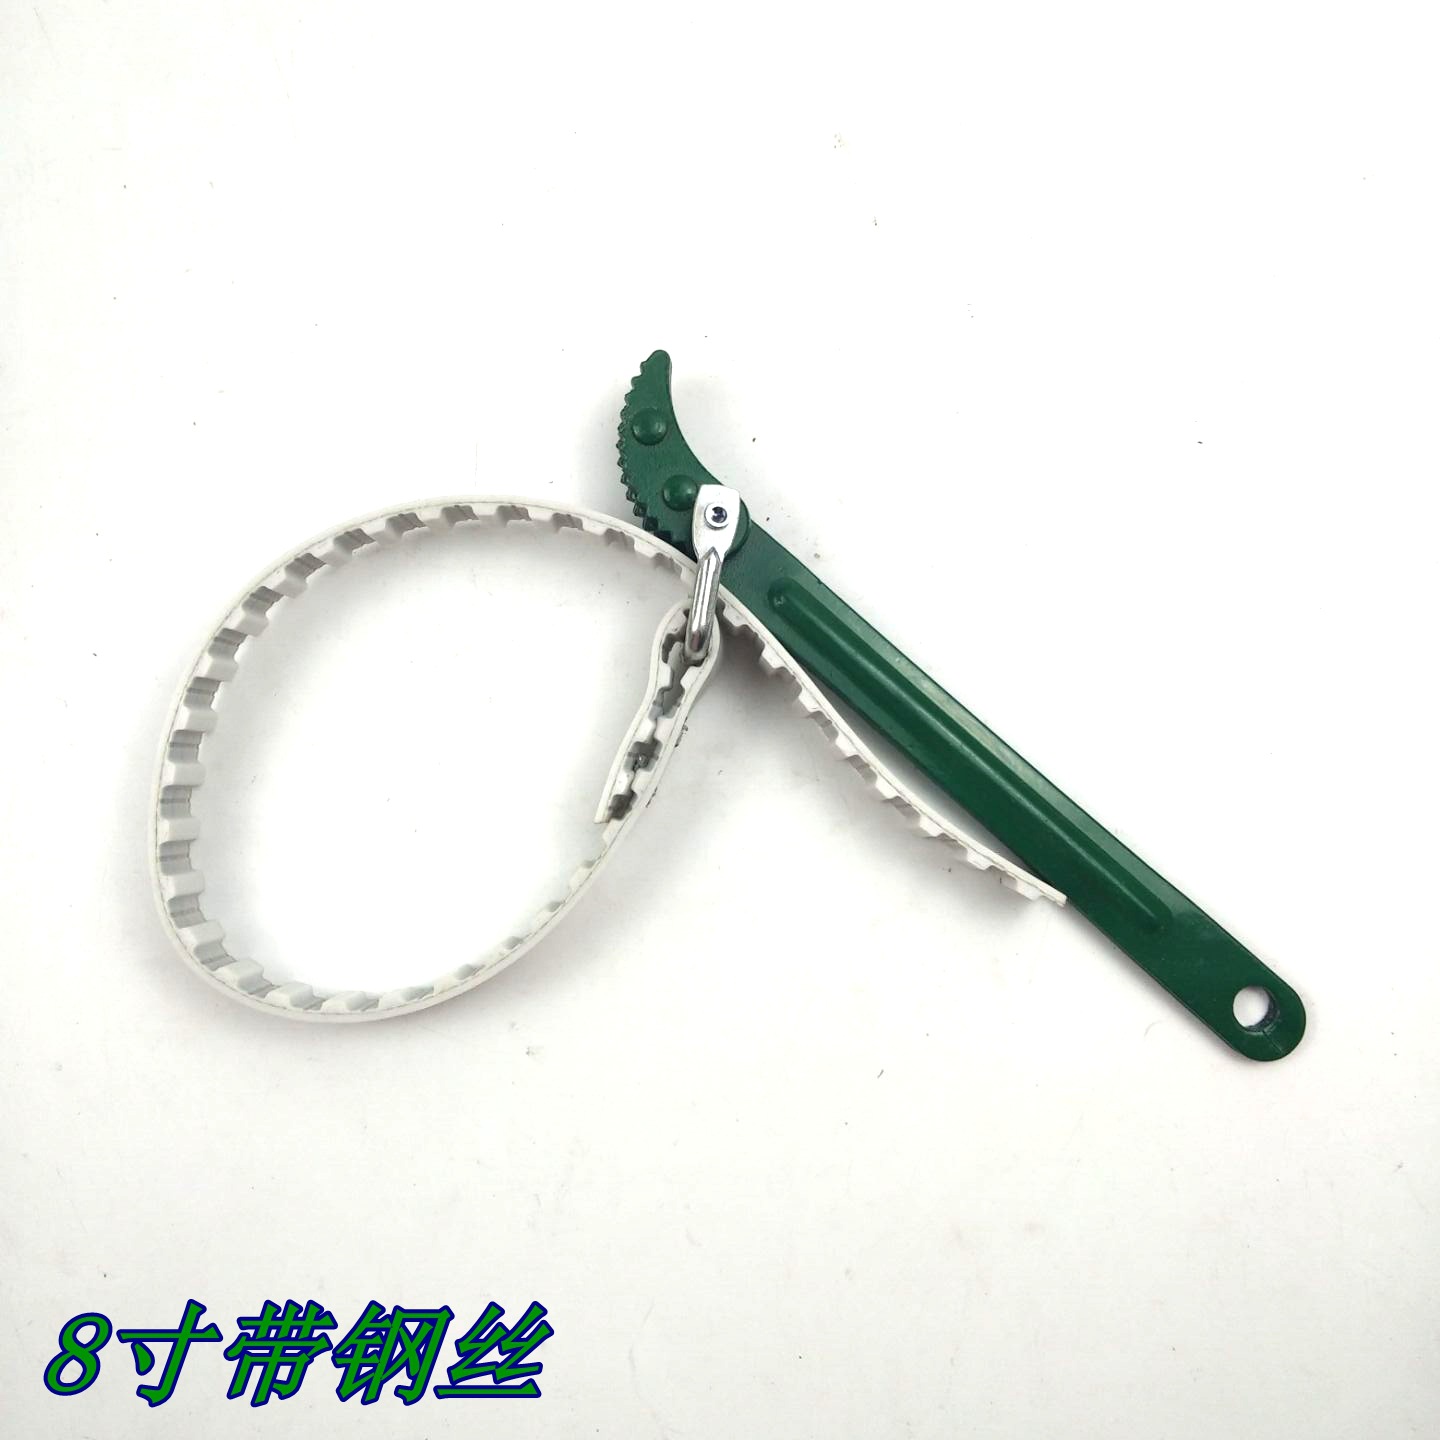 Oil Filter Wrench Filter Element Belt Wrench Car Oil Grid Disassembly Machine Filter Wrench Oil Change Tool